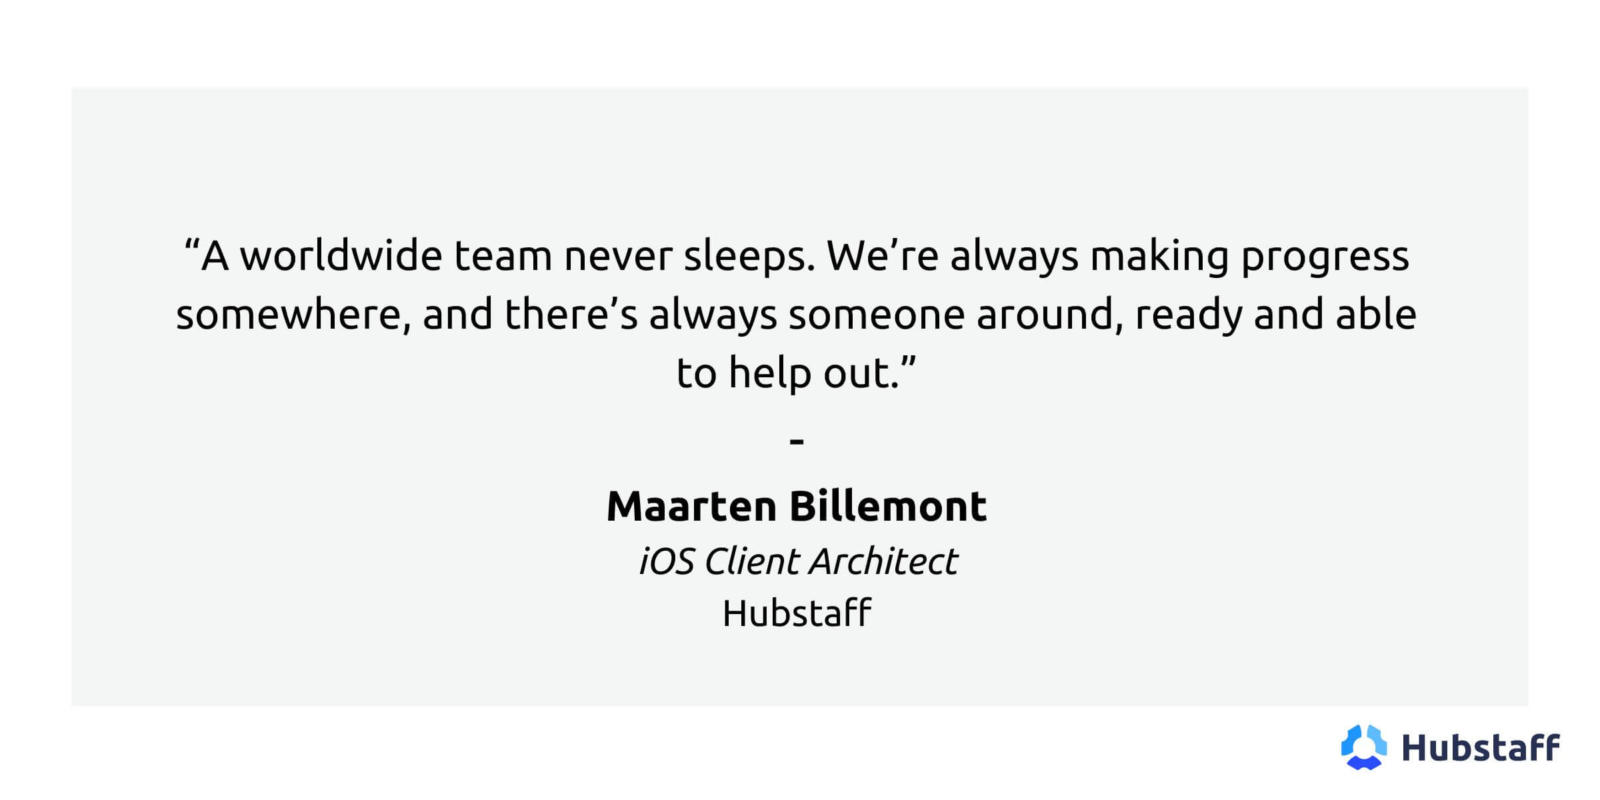 "A worldwide team never sleeps. We're always making progress somewhere, and there's always someone around, ready and able to help out." 

Maarten Billemont
iOS Client Architect
Hubstaff